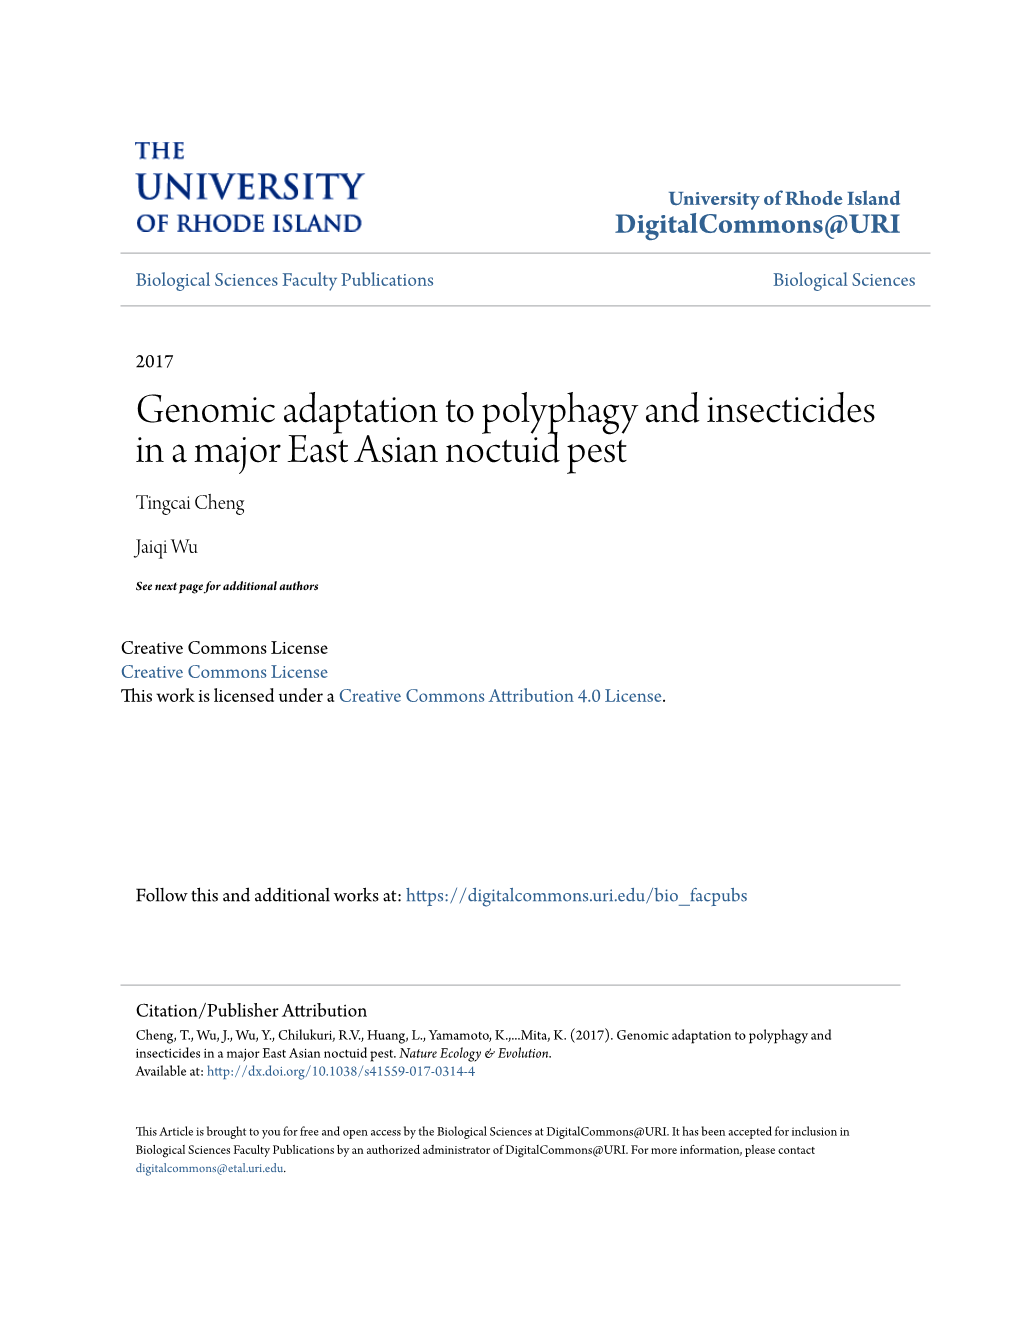 Genomic Adaptation to Polyphagy and Insecticides in a Major East Asian Noctuid Pest Tingcai Cheng